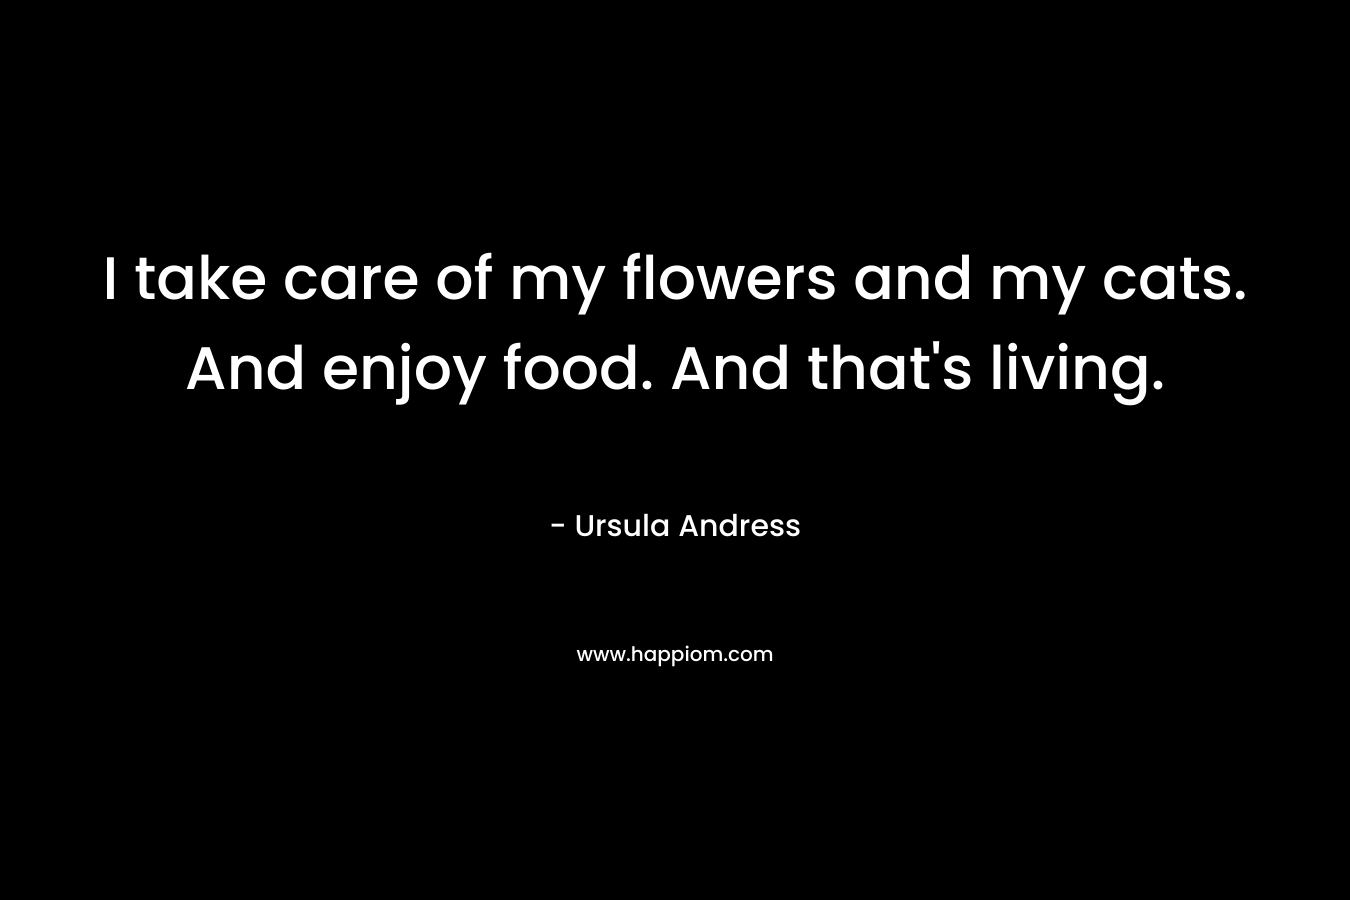 I take care of my flowers and my cats. And enjoy food. And that’s living. – Ursula Andress